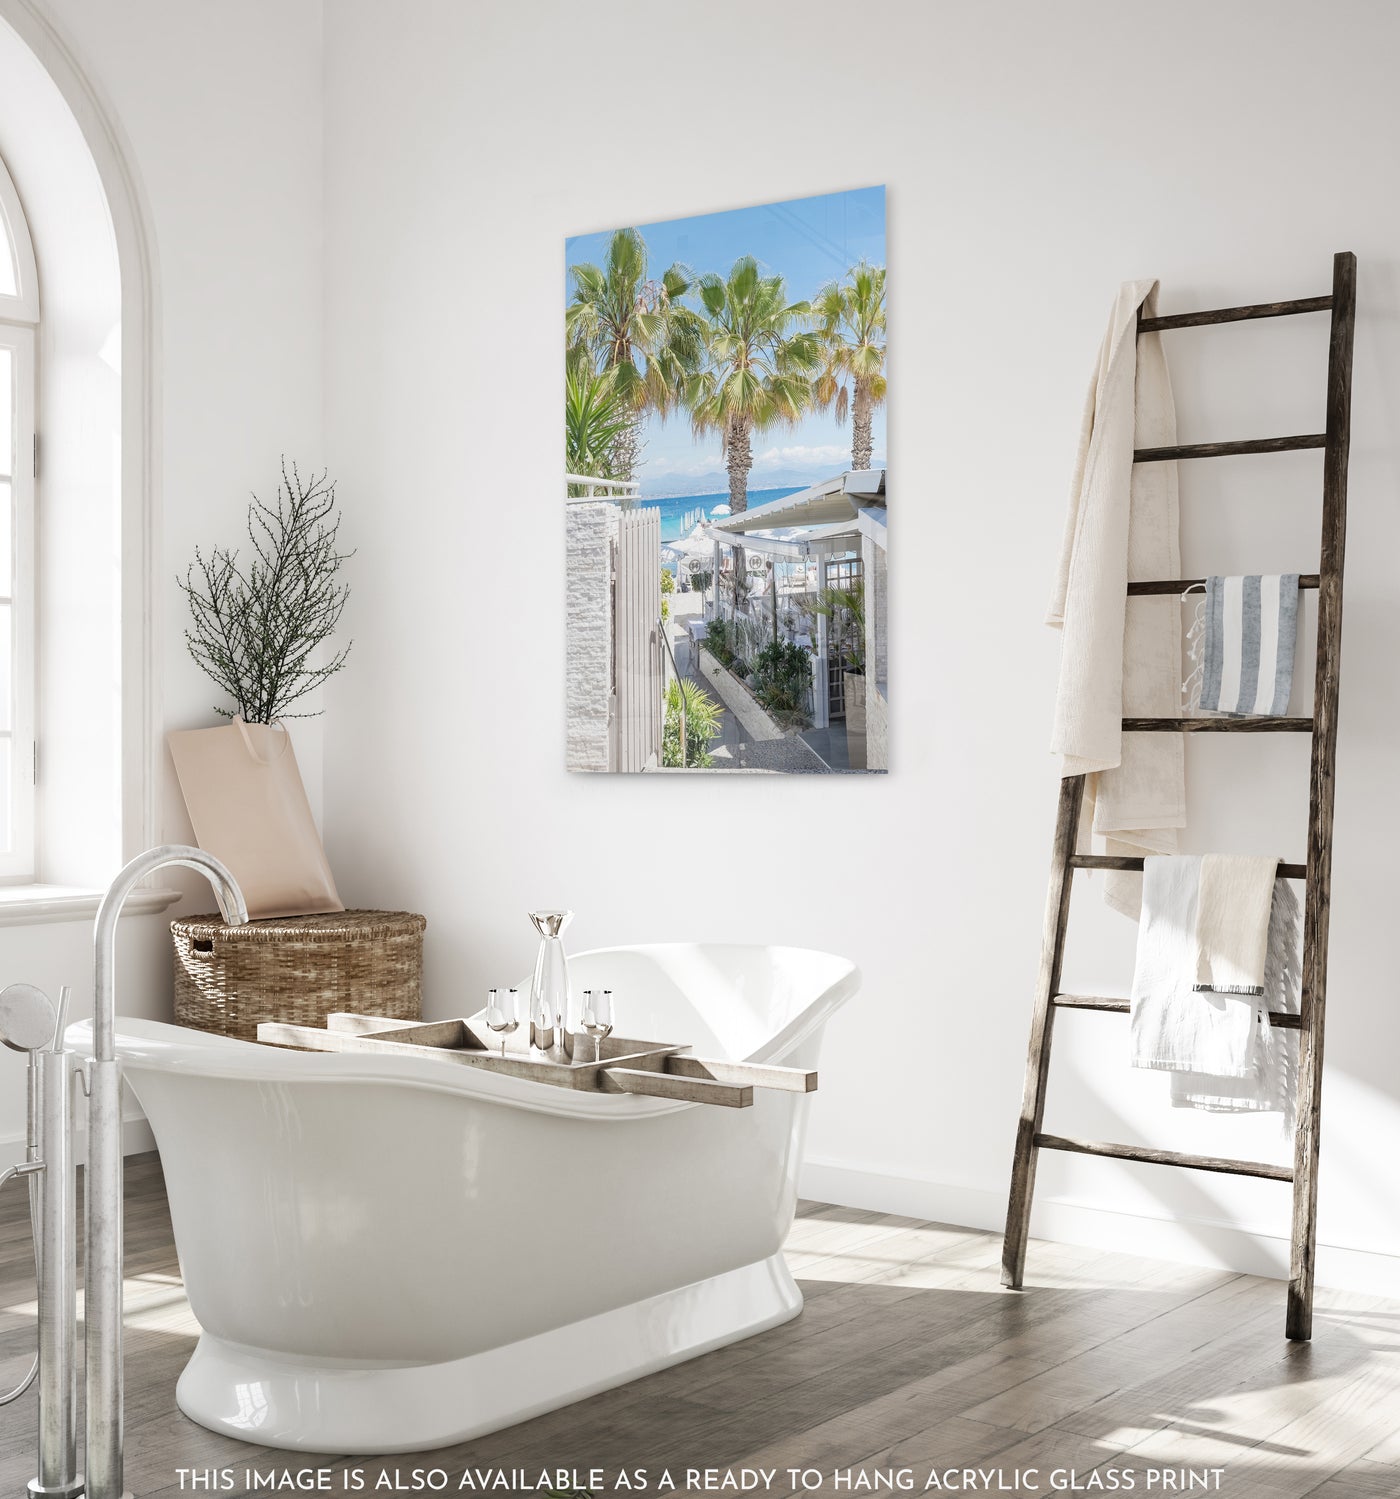 Plage Keller - Acrylic glass art print by Cattie Coyle Photography in bathroom